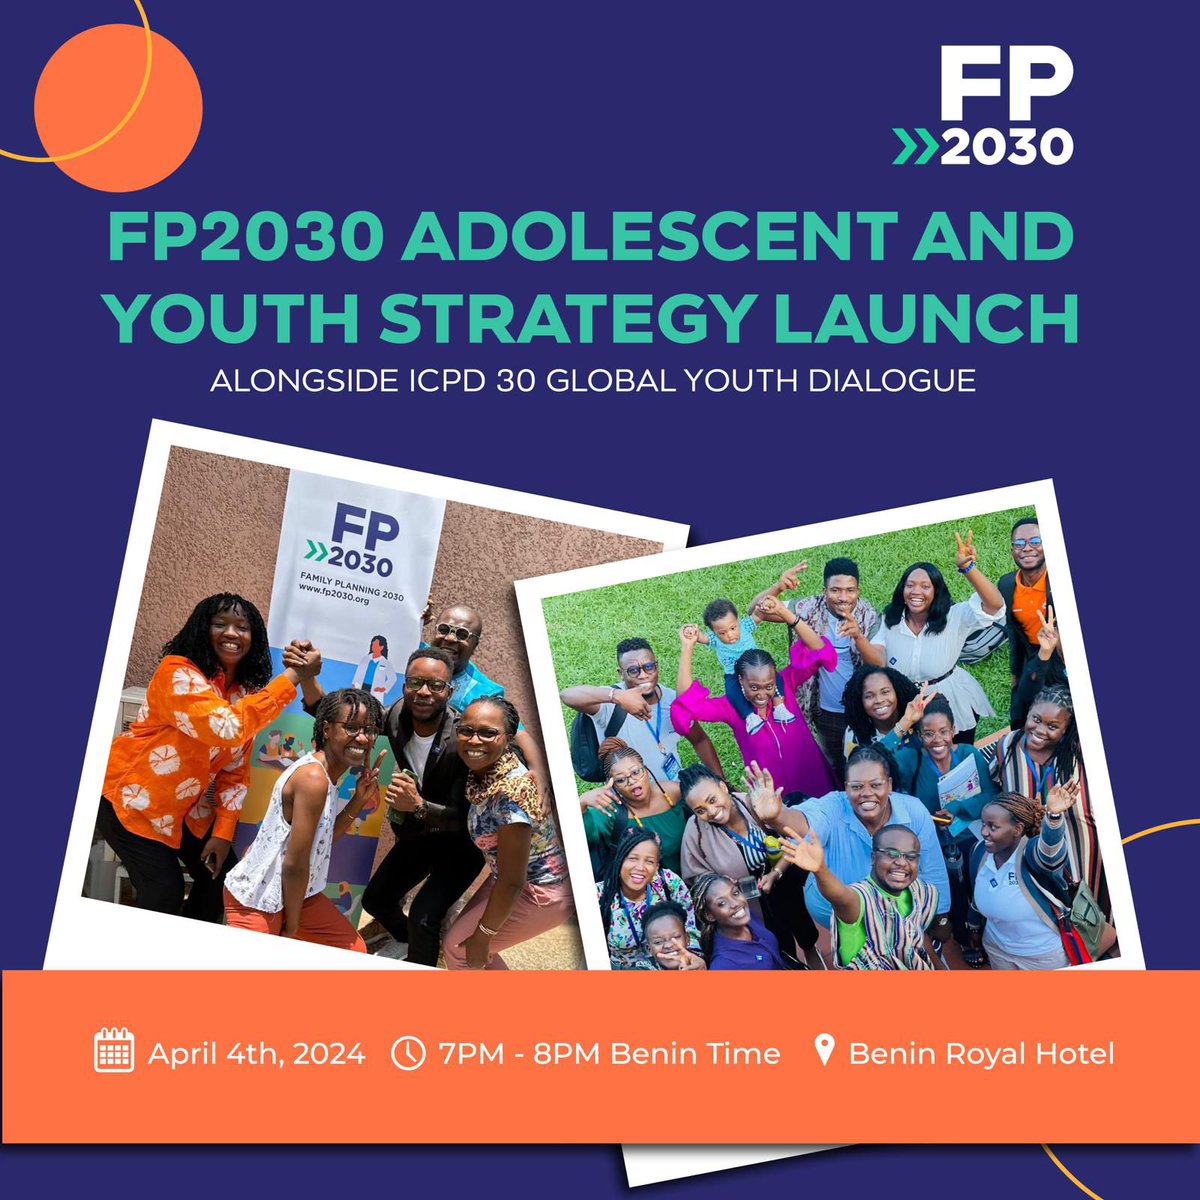 📢#FP2030 is set to launch its Adolescent & Youth Strategy @ICPD+30 Global Youth Dialogue in Cotonou, Benin. 🗓️4th April, 2024 ⏰7pm 🏨Benin Royal Hotel ✨Empowering the youth to make right choices through dialogue. #YouthEmpowerment